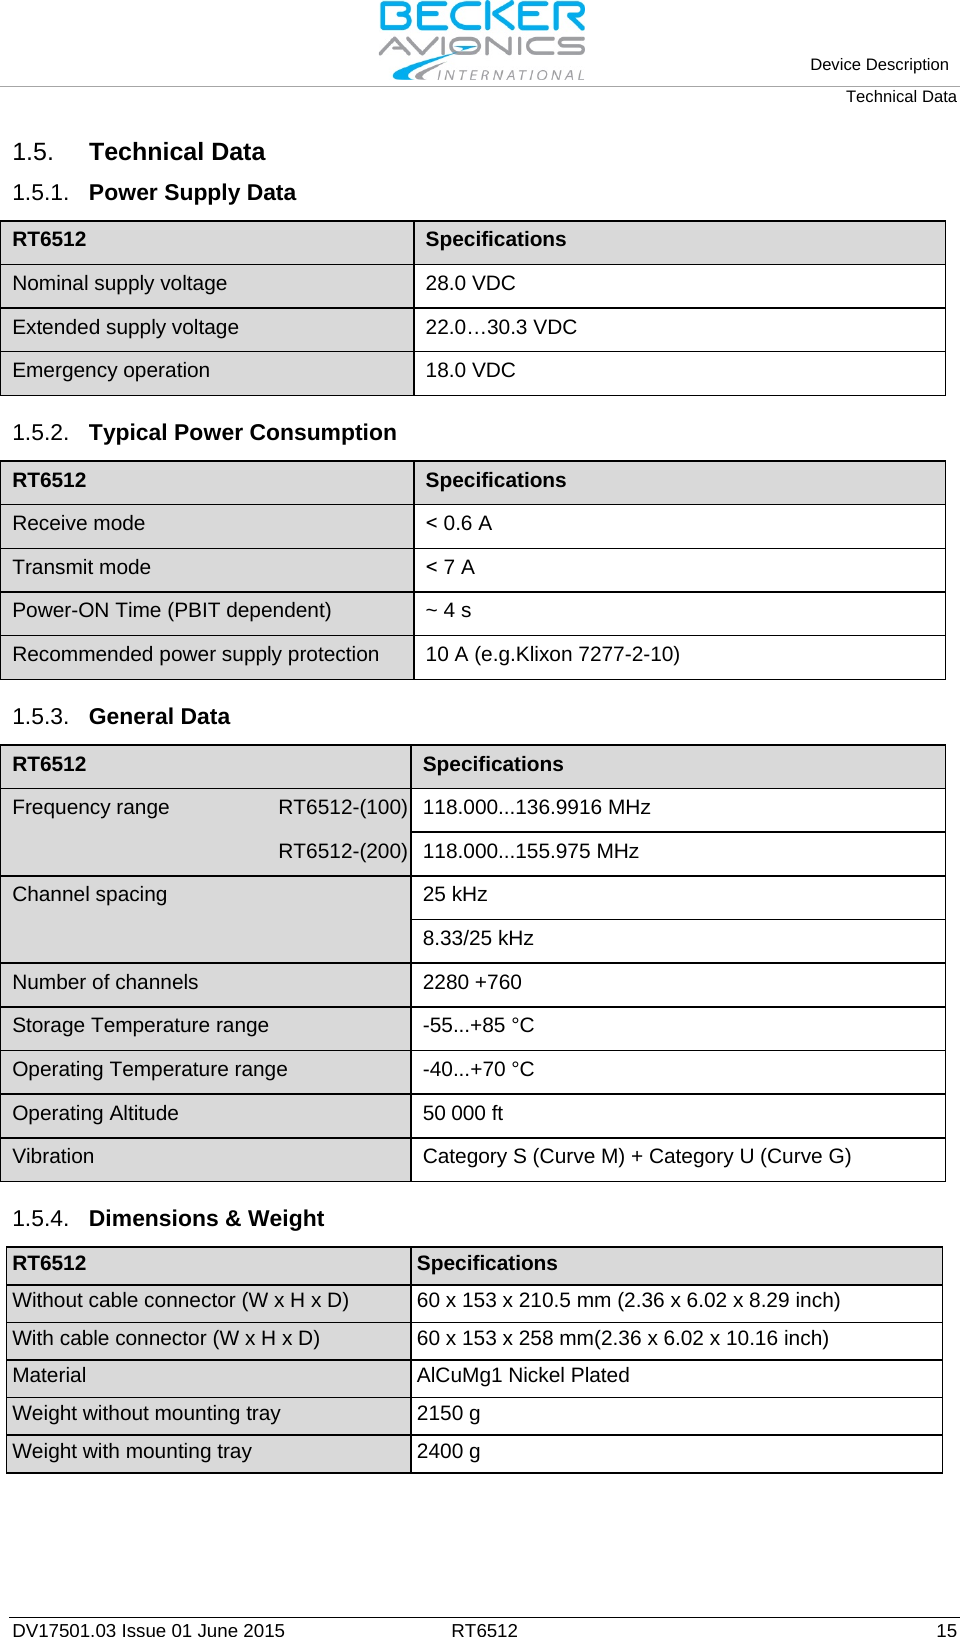   Device Description Technical Data  DV17501.03 Issue 01 June 2015 RT6512 15 1.5. Technical Data 1.5.1. Power Supply Data  RT6512 Specifications Nominal supply voltage 28.0 VDC Extended supply voltage 22.0…30.3 VDC Emergency operation 18.0 VDC    1.5.2. Typical Power Consumption  RT6512 Specifications Receive mode ˂ 0.6 A Transmit mode ˂ 7 A Power-ON Time (PBIT dependent) ~ 4 s Recommended power supply protection 10 A (e.g.Klixon 7277-2-10)   1.5.3. General Data  RT6512 Specifications Frequency range  RT6512-(100) 118.000...136.9916 MHz   RT6512-(200) 118.000...155.975 MHz Channel spacing 25 kHz 8.33/25 kHz Number of channels 2280 +760 Storage Temperature range -55...+85 °C Operating Temperature range -40...+70 °C Operating Altitude 50 000 ft Vibration Category S (Curve M) + Category U (Curve G)   1.5.4. Dimensions &amp; Weight  RT6512 Specifications Without cable connector (W x H x D) 60 x 153 x 210.5 mm (2.36 x 6.02 x 8.29 inch) With cable connector (W x H x D) 60 x 153 x 258 mm(2.36 x 6.02 x 10.16 inch) Material AlCuMg1 Nickel Plated Weight without mounting tray 2150 g Weight with mounting tray 2400 g   